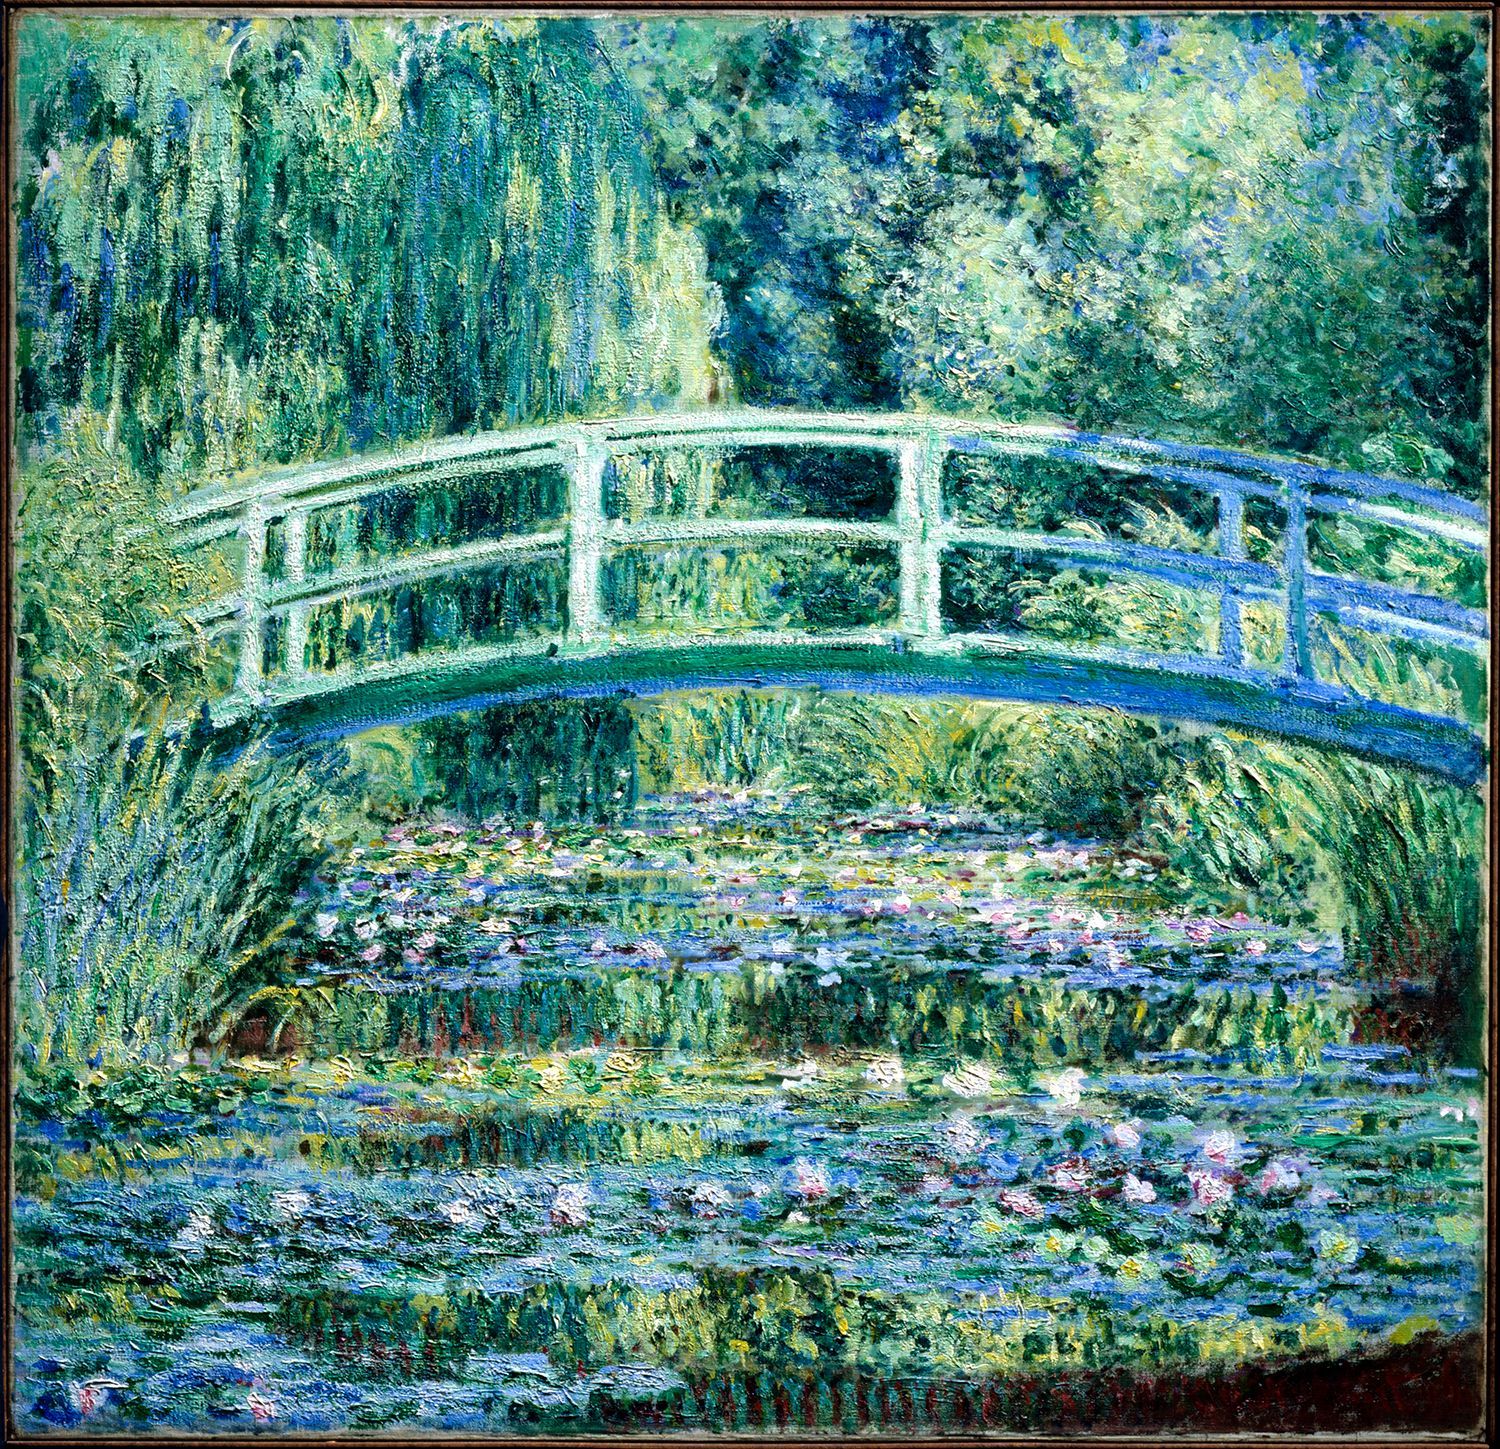 Claude Monet Waterlilies and Japanese Bridge, c. 1899  Oil on canvas, 35-5/8 by 35-5/16 inches.  Princeton University Art Museum